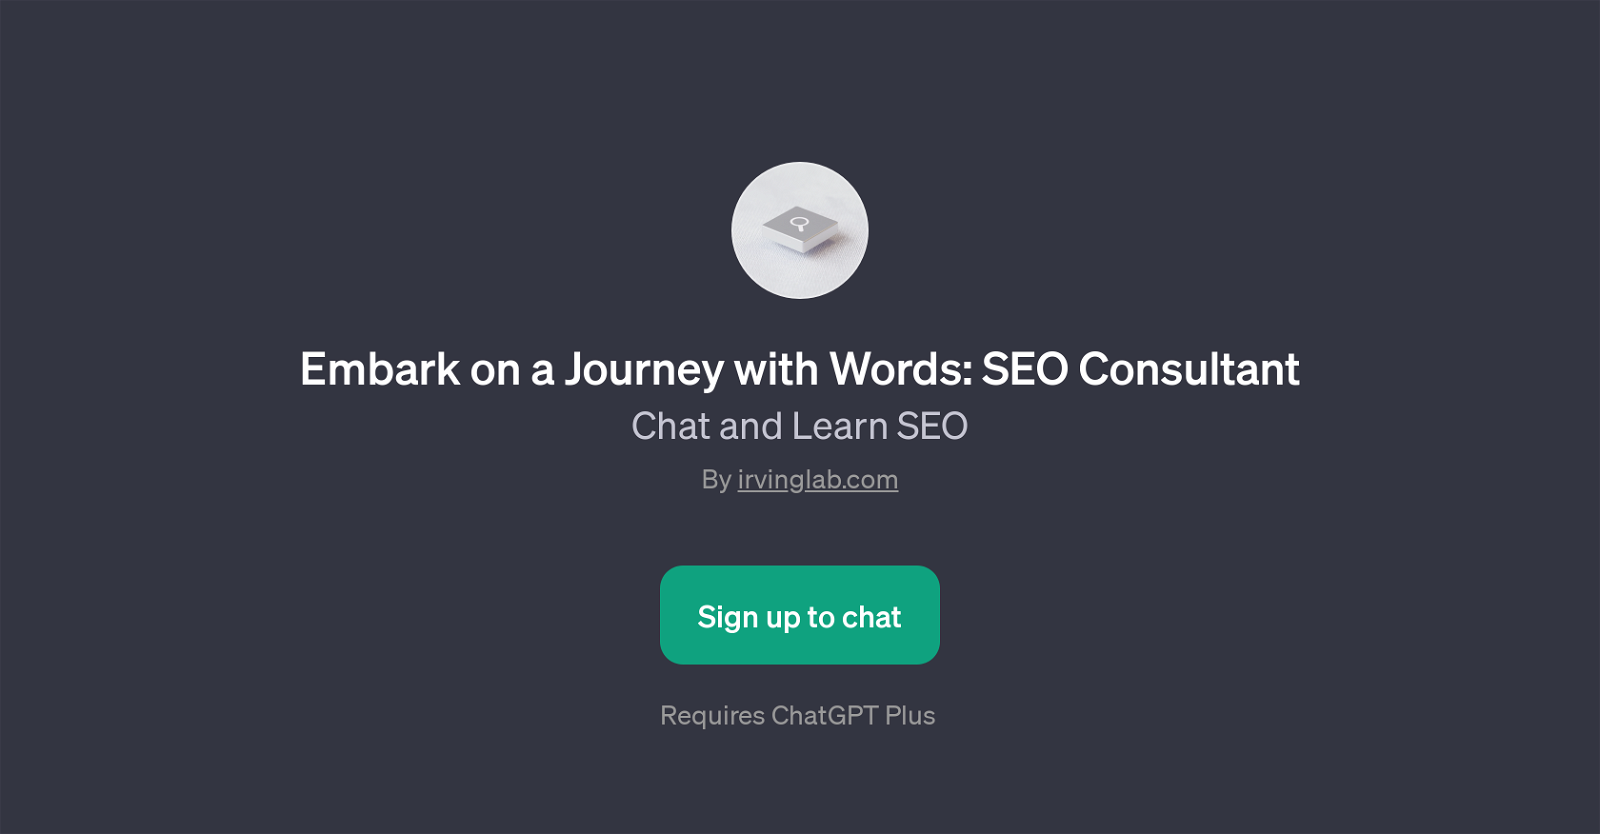 Embark on a Journey with Words: SEO Consultant - Seo education - TAAFT